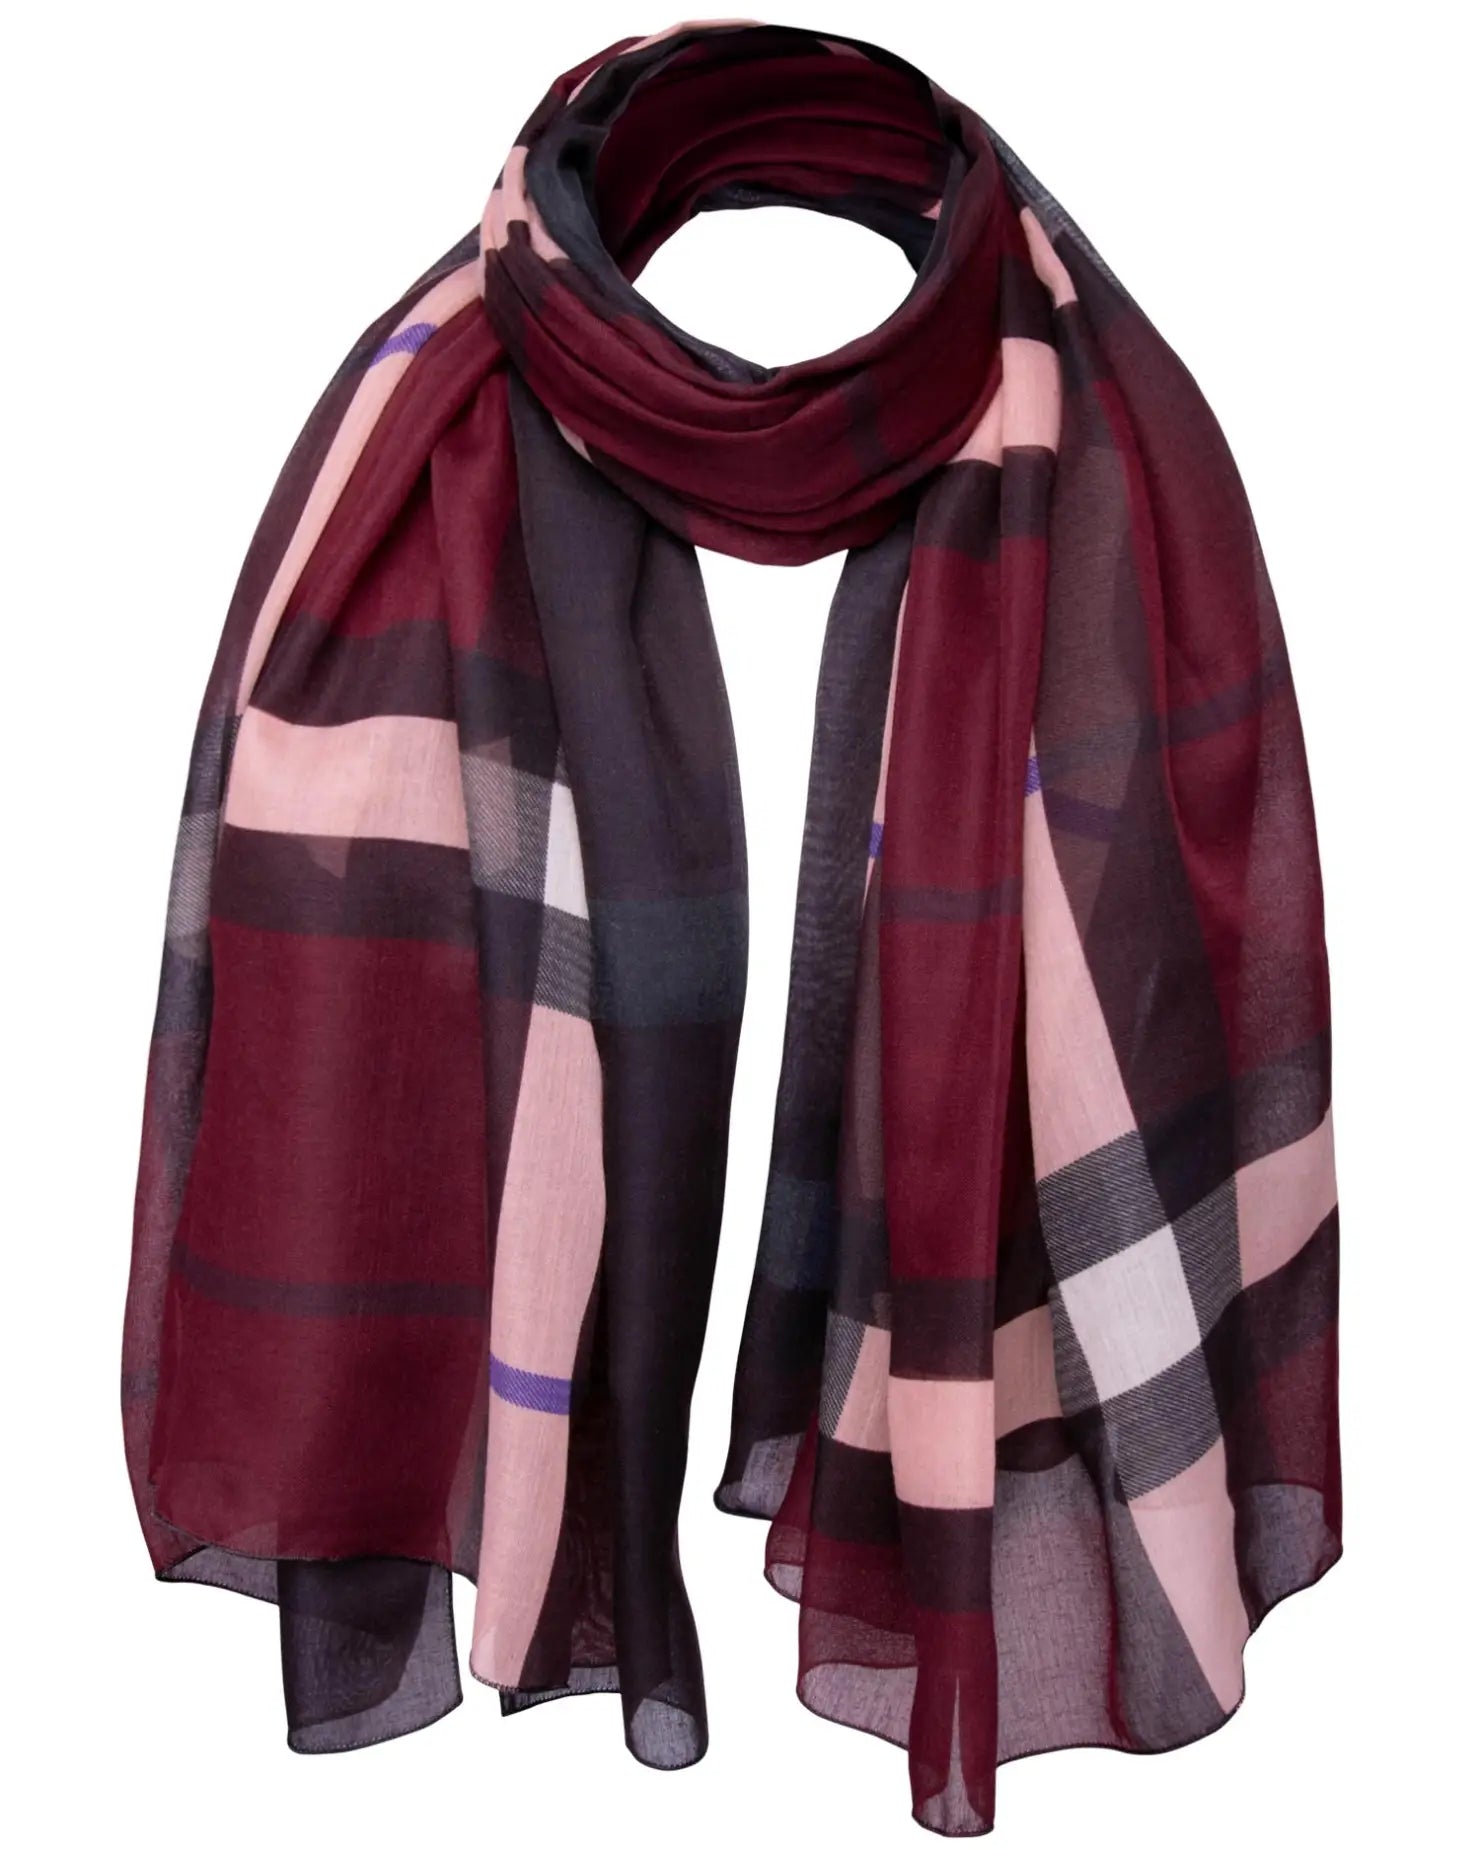 Ombre Tartan Oversized Scarf with Check Pattern